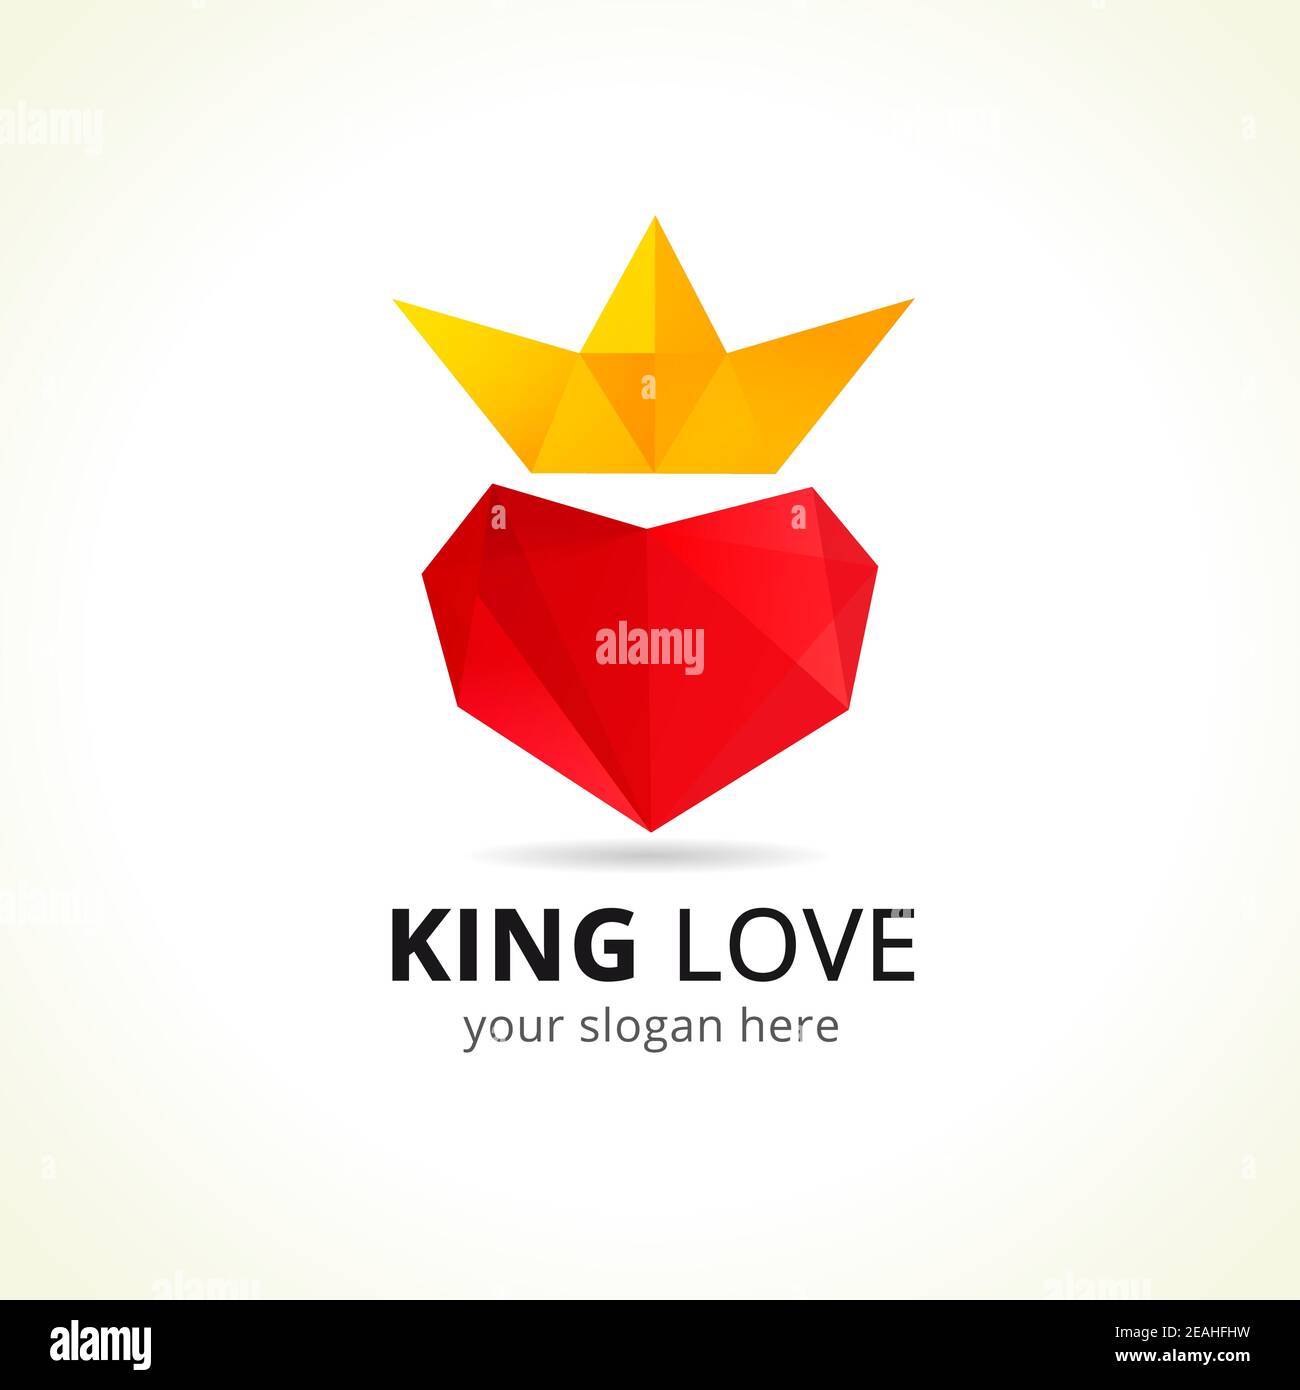 King of love vector logo concept. Entertainment business creative symbol. Heart and crown, red and yellow colors. Celebrating icon. Isolated abstract Stock Vector